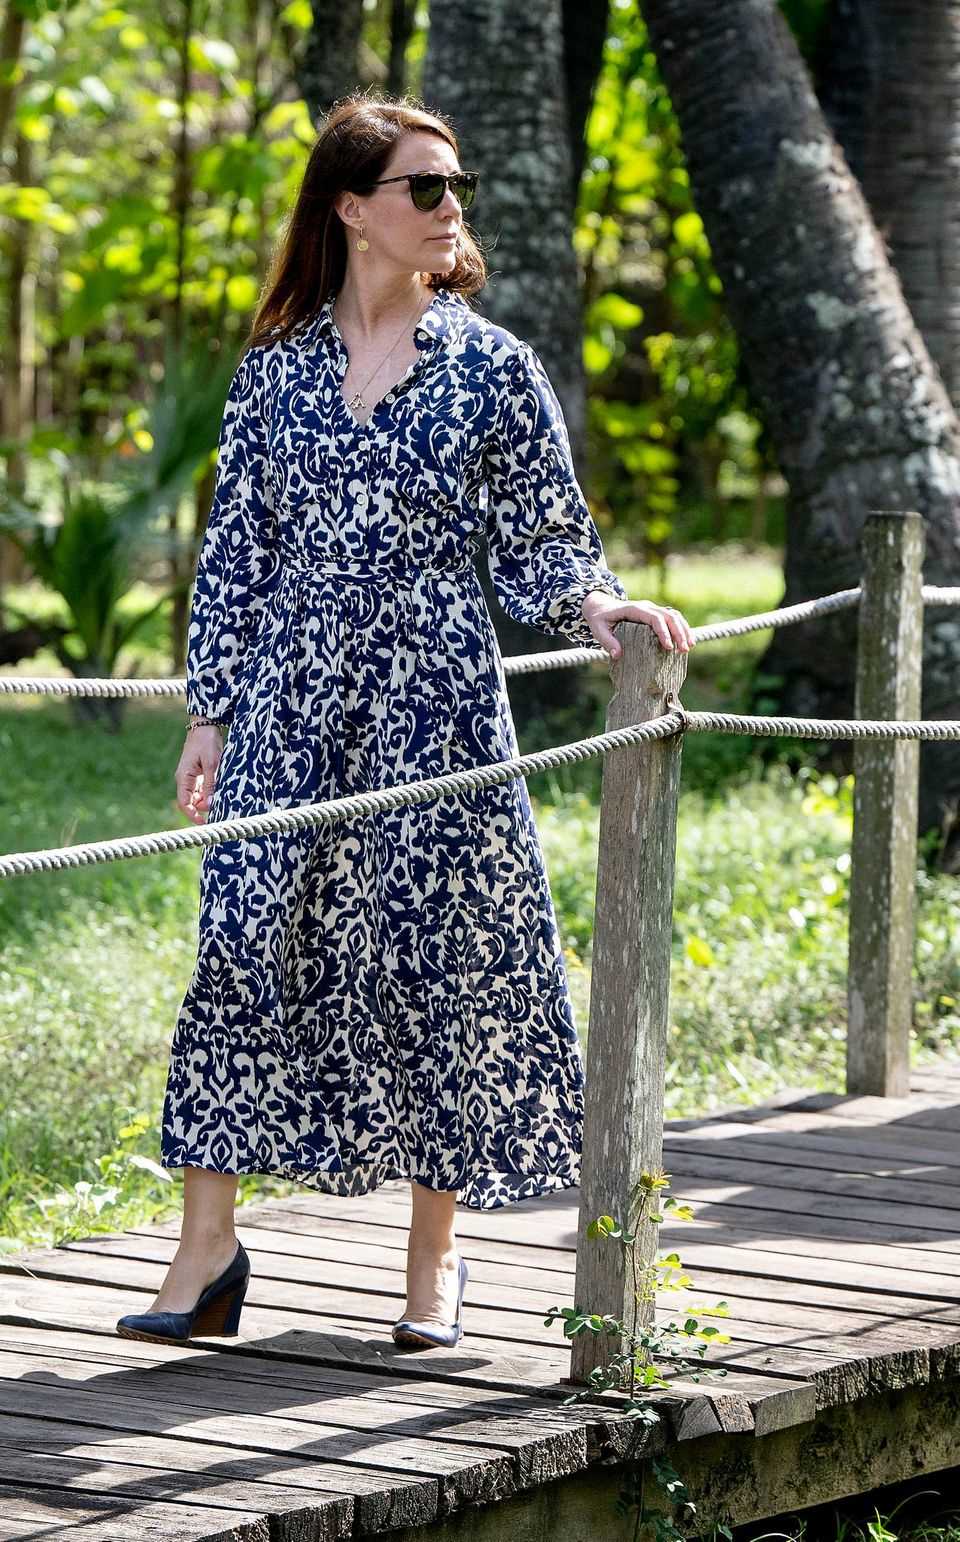 Princess Marie visits Cambodia and chooses a Zara dress for the first day. 